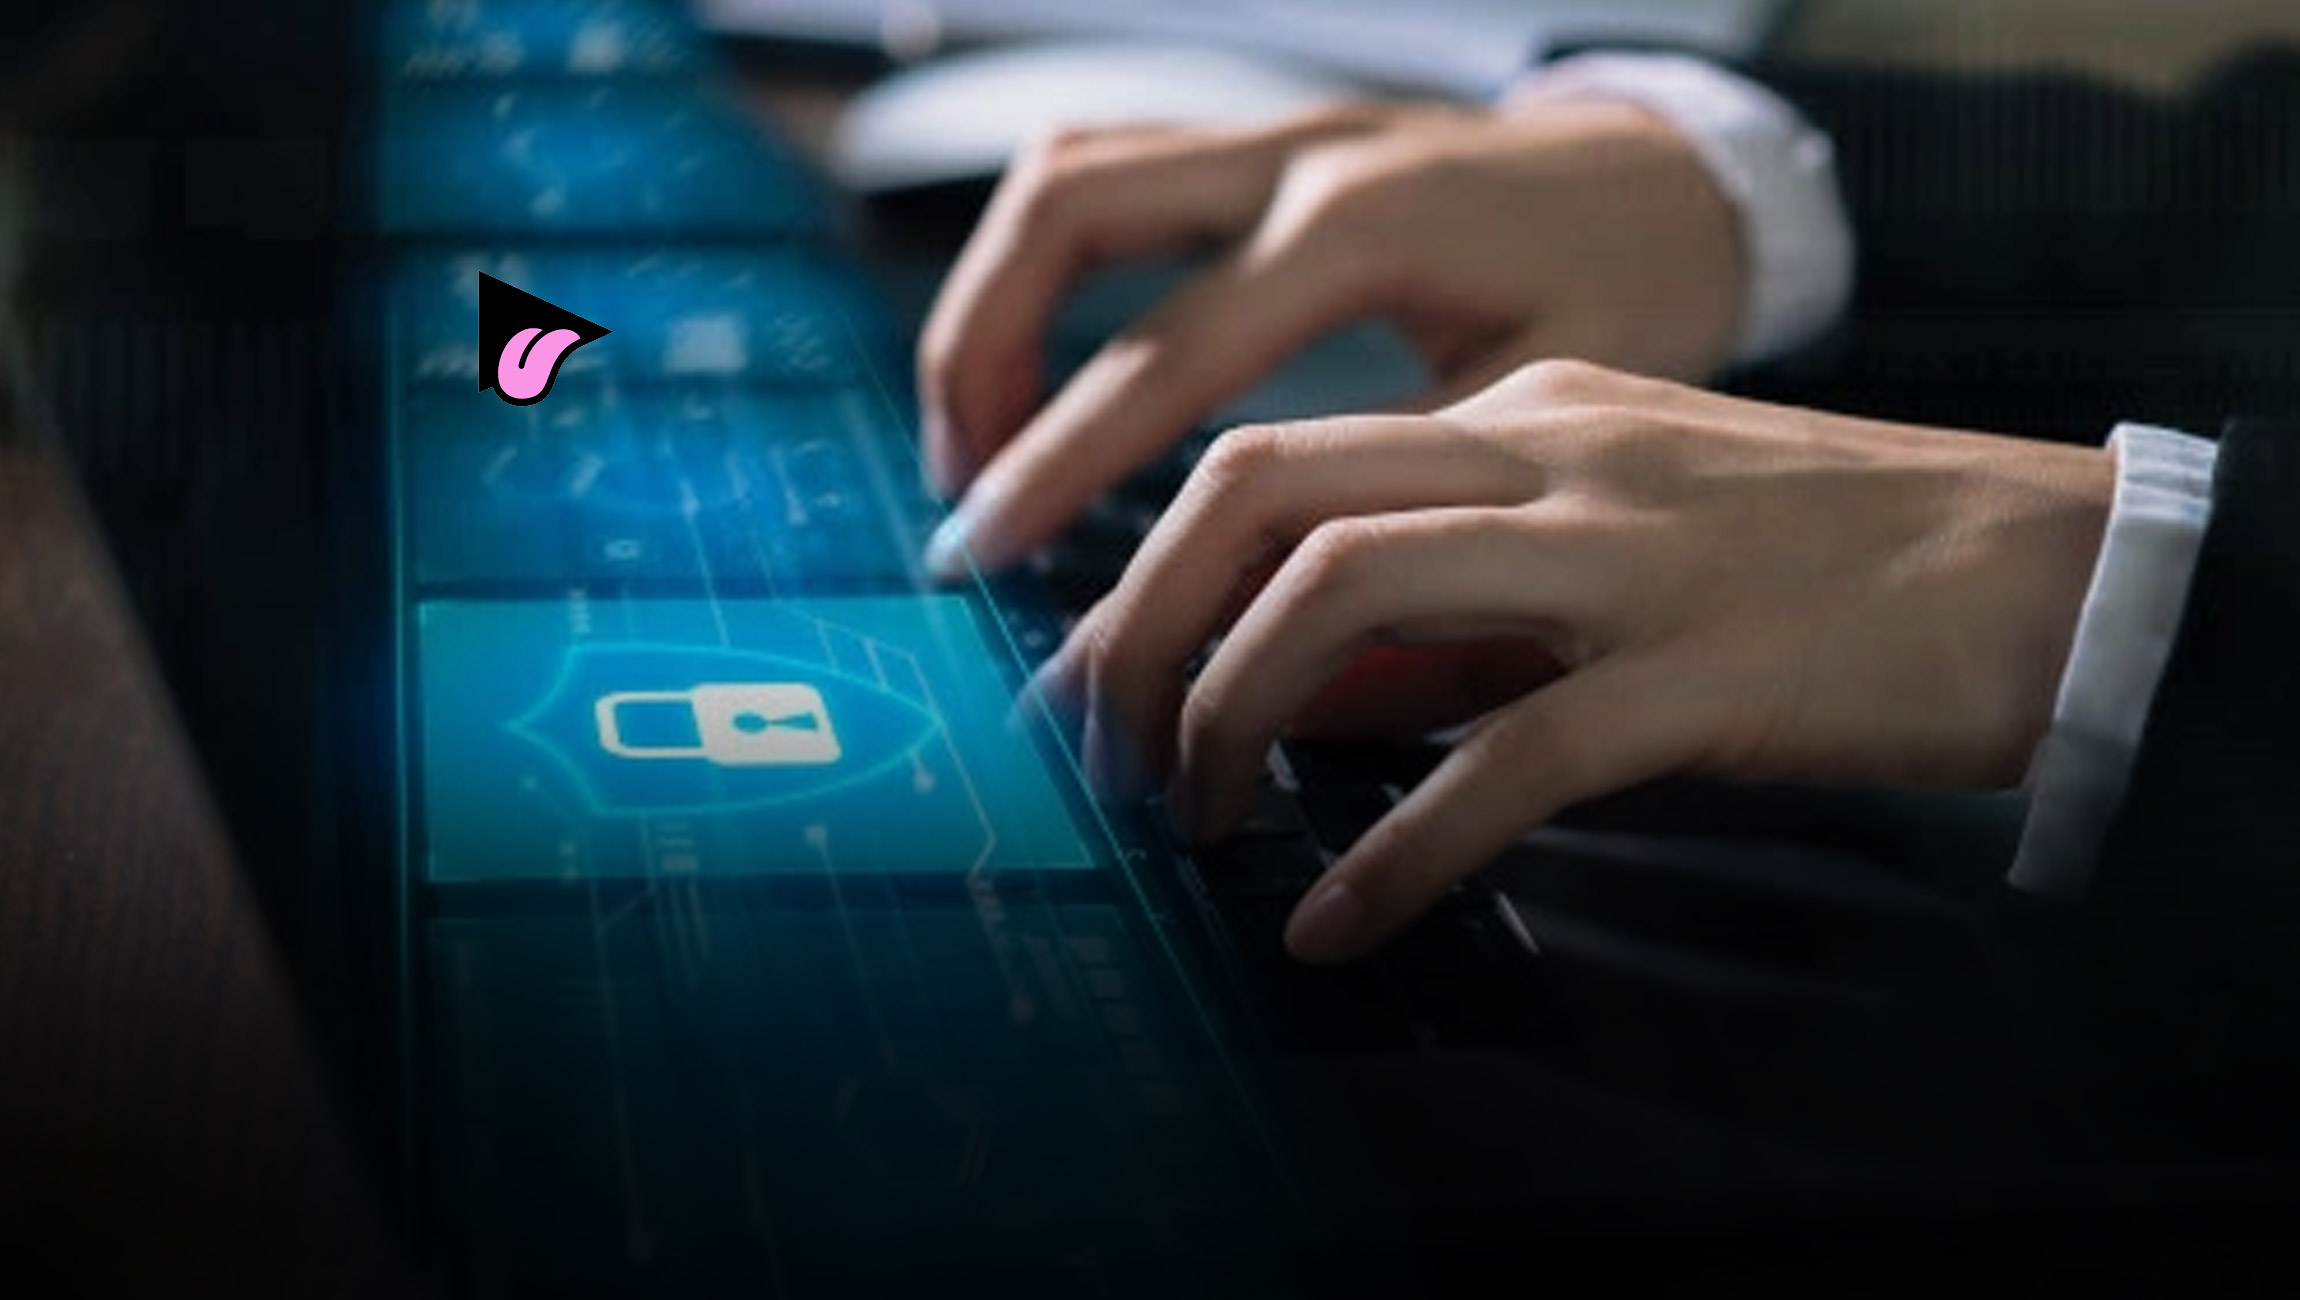 Vidy Expands Decentralized Video Ad Network to Empower Publishers Solving Ad-Fraud